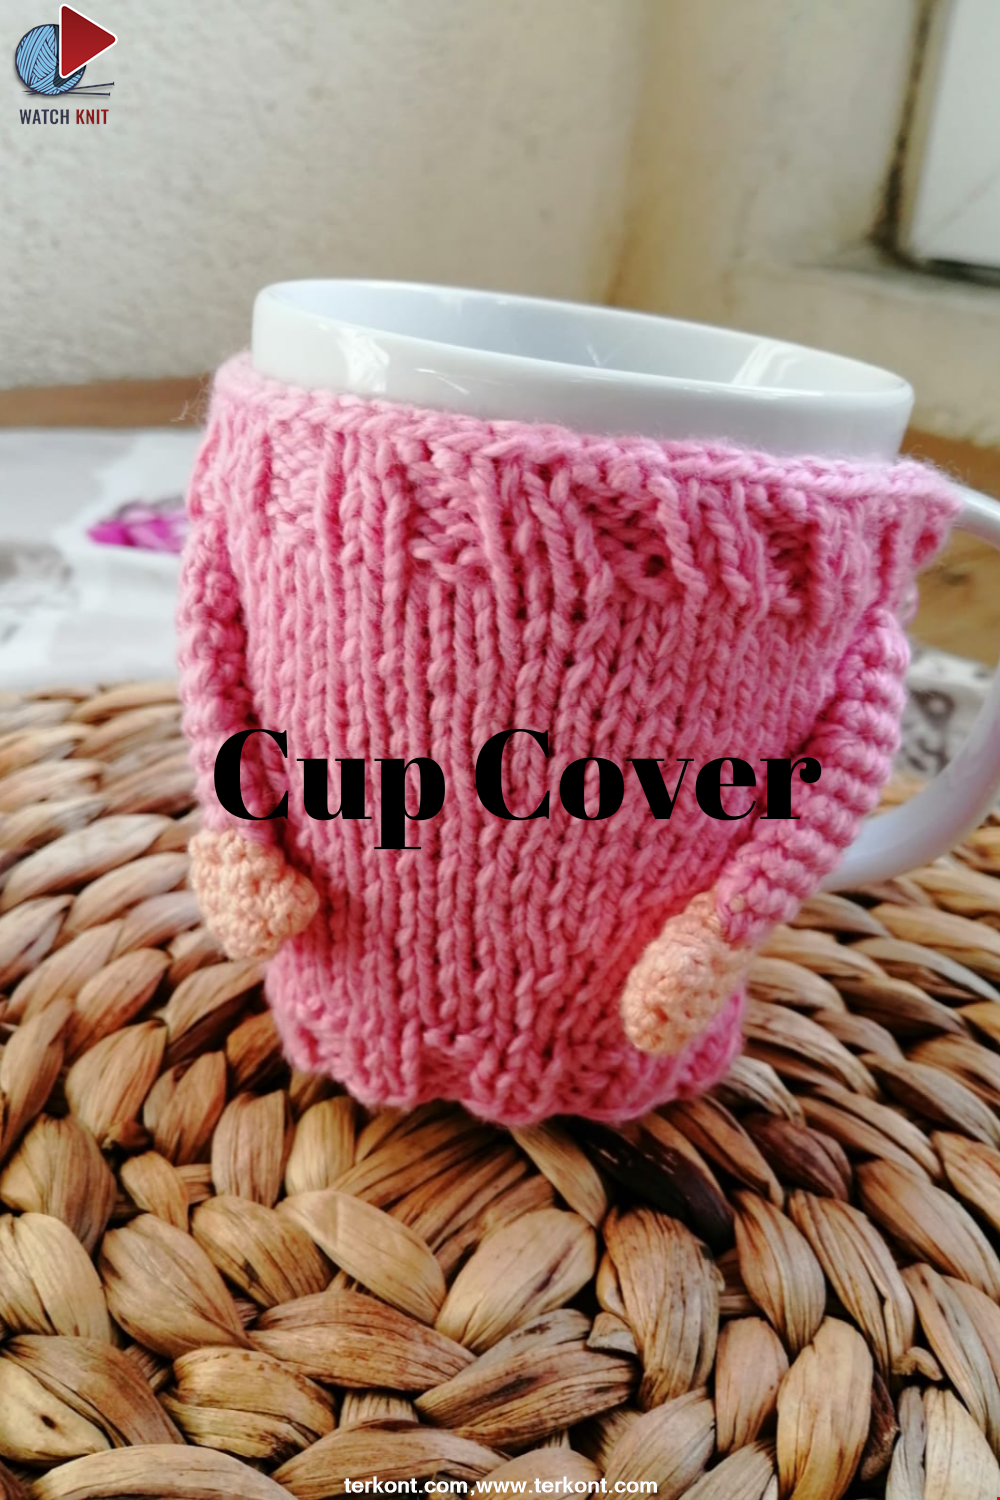 Making the Cup Cover pink